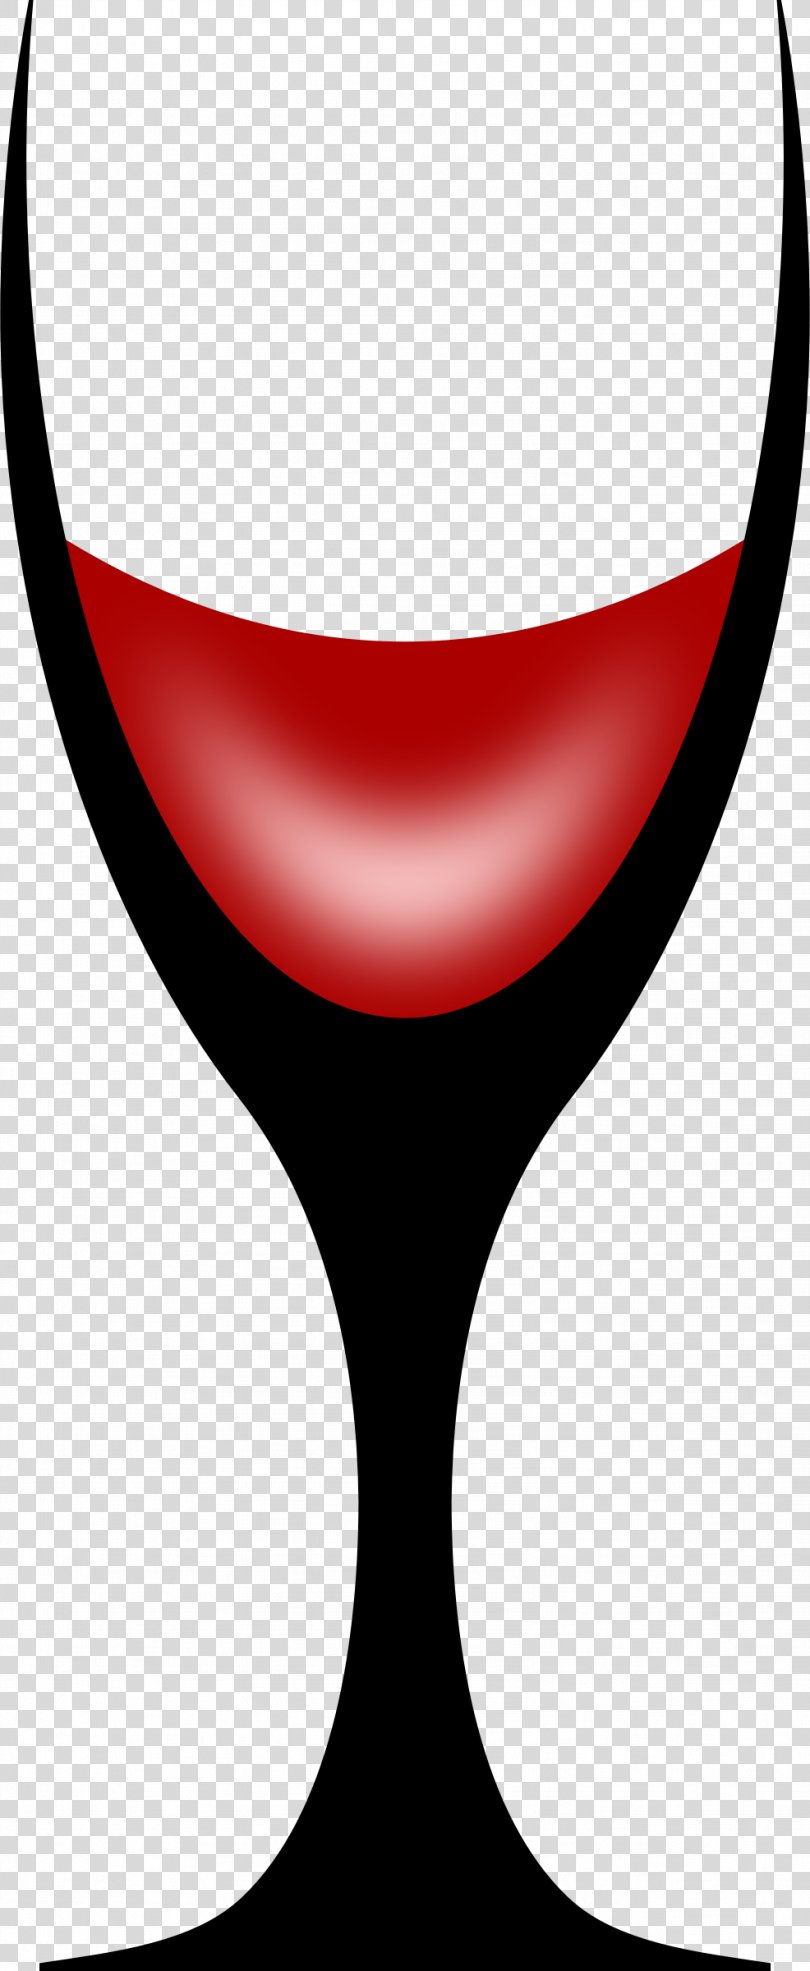 Wine Glass Red Wine Clip Art, Glass Of Wine PNG